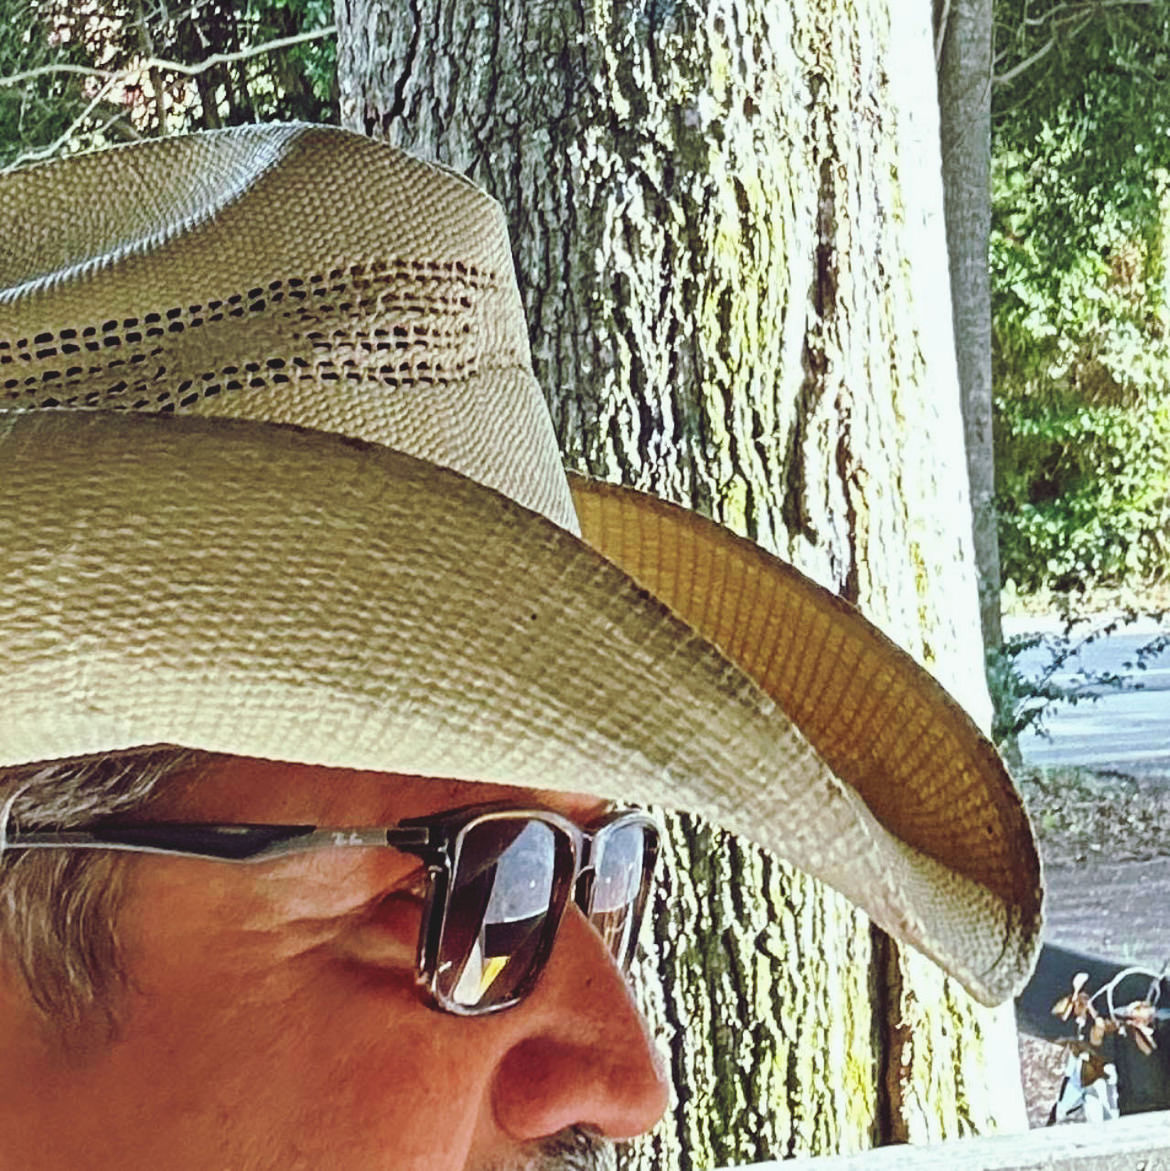 fashion accessory, one person, hat, sun hat, sunglasses, headshot, day, leisure activity, glasses, adult, portrait, lifestyles, fashion, men, nature, outdoors, sunlight, straw hat, cowboy hat, close-up, women, clothing, person, human face, cap, tree, fedora, security